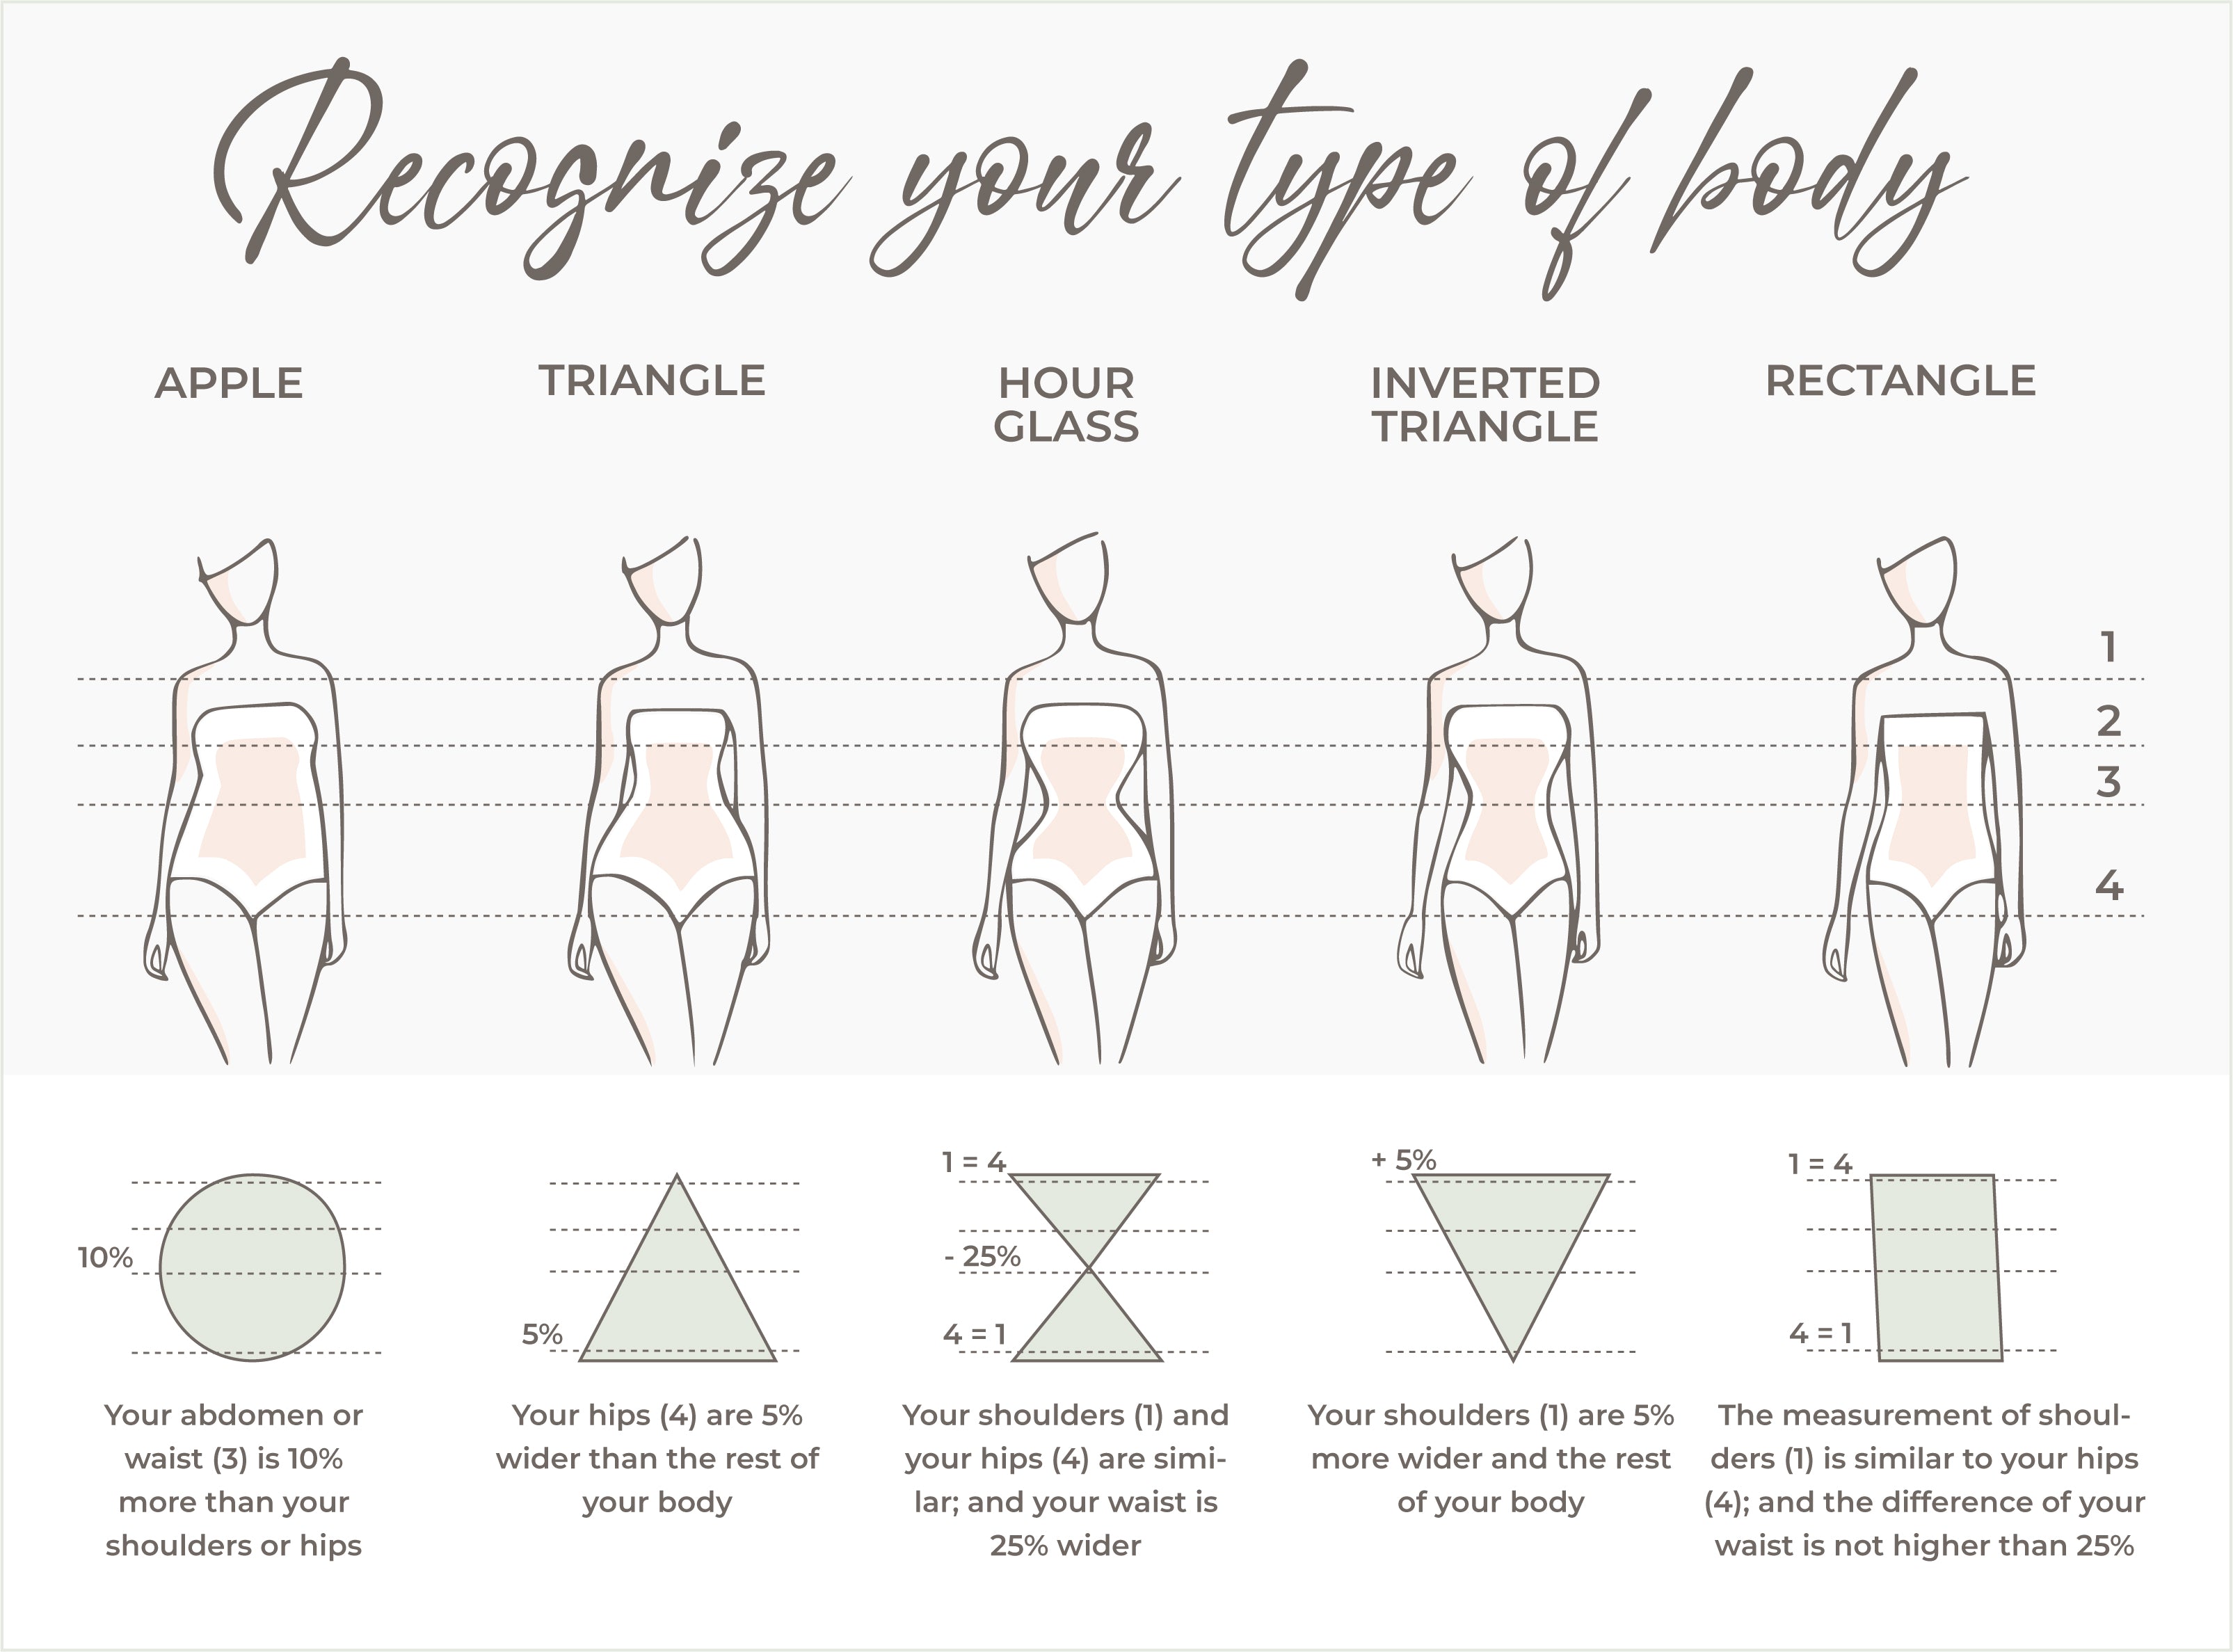 Know your Body Type: Finding Racewear to Complement your Shape